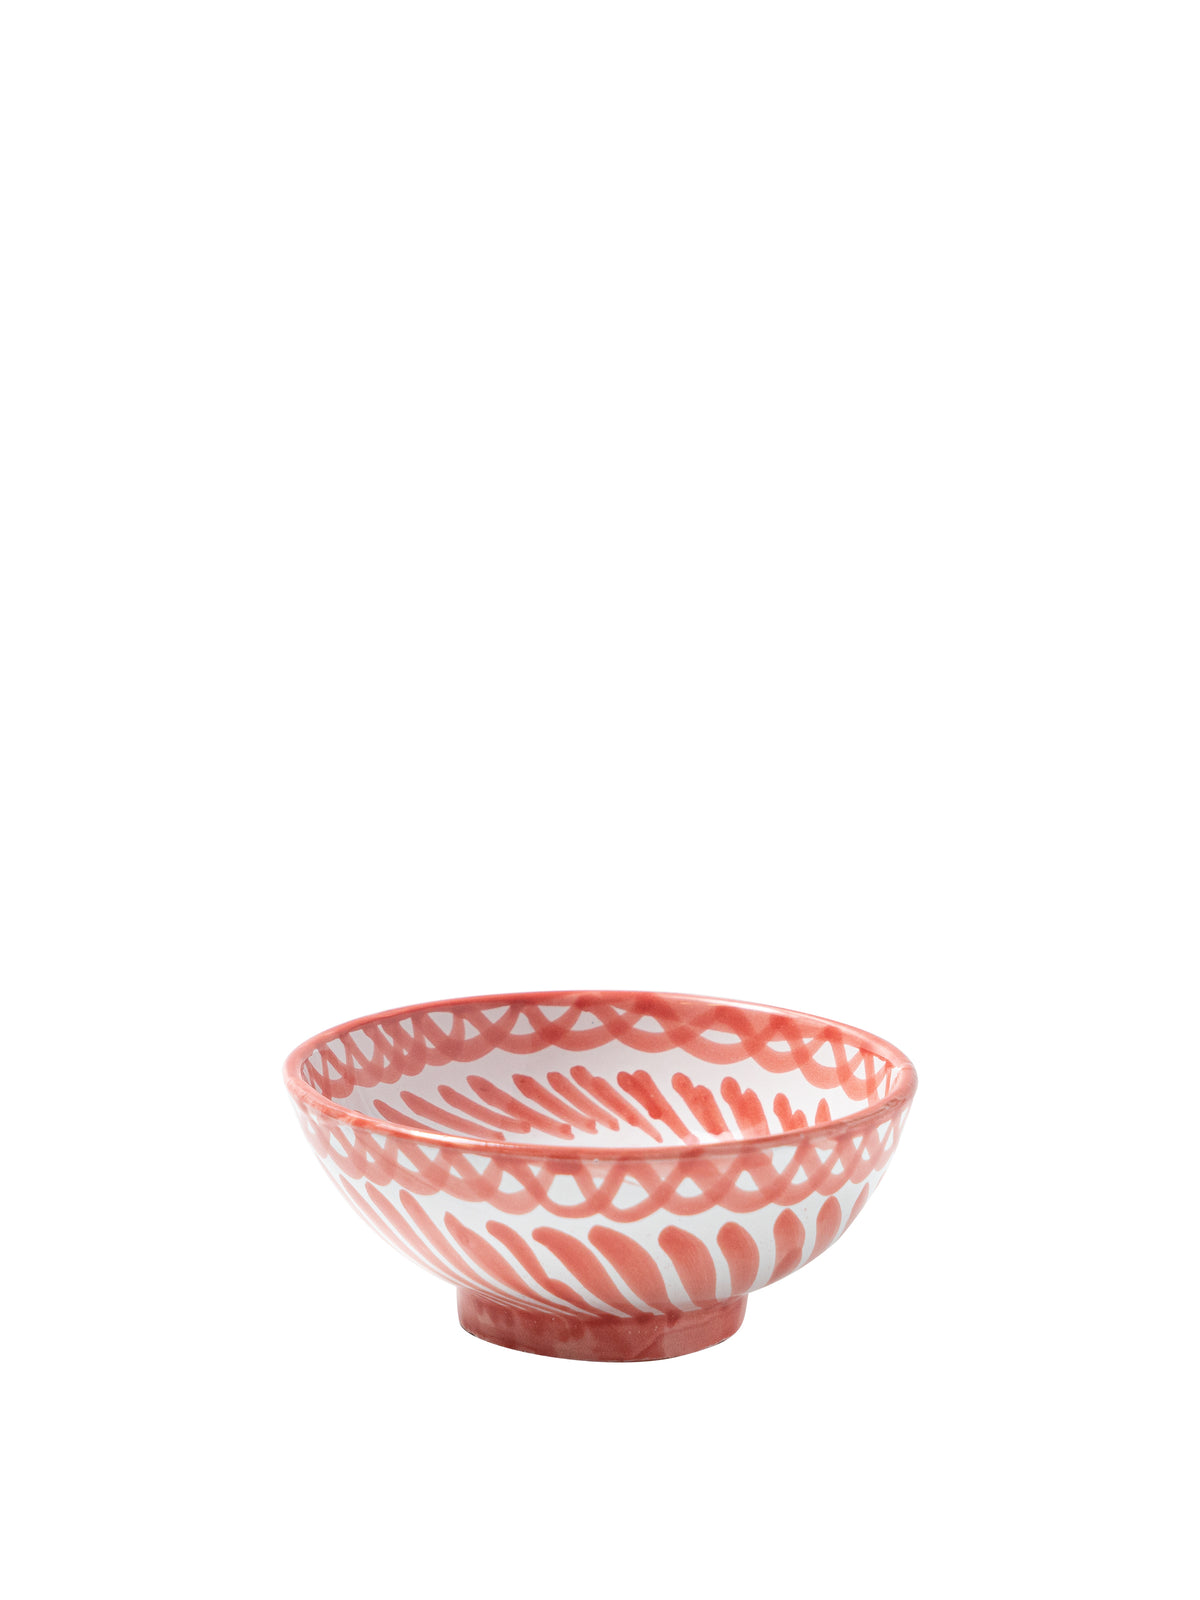 Casa Coral Small Bowl with Hand-painted Designs